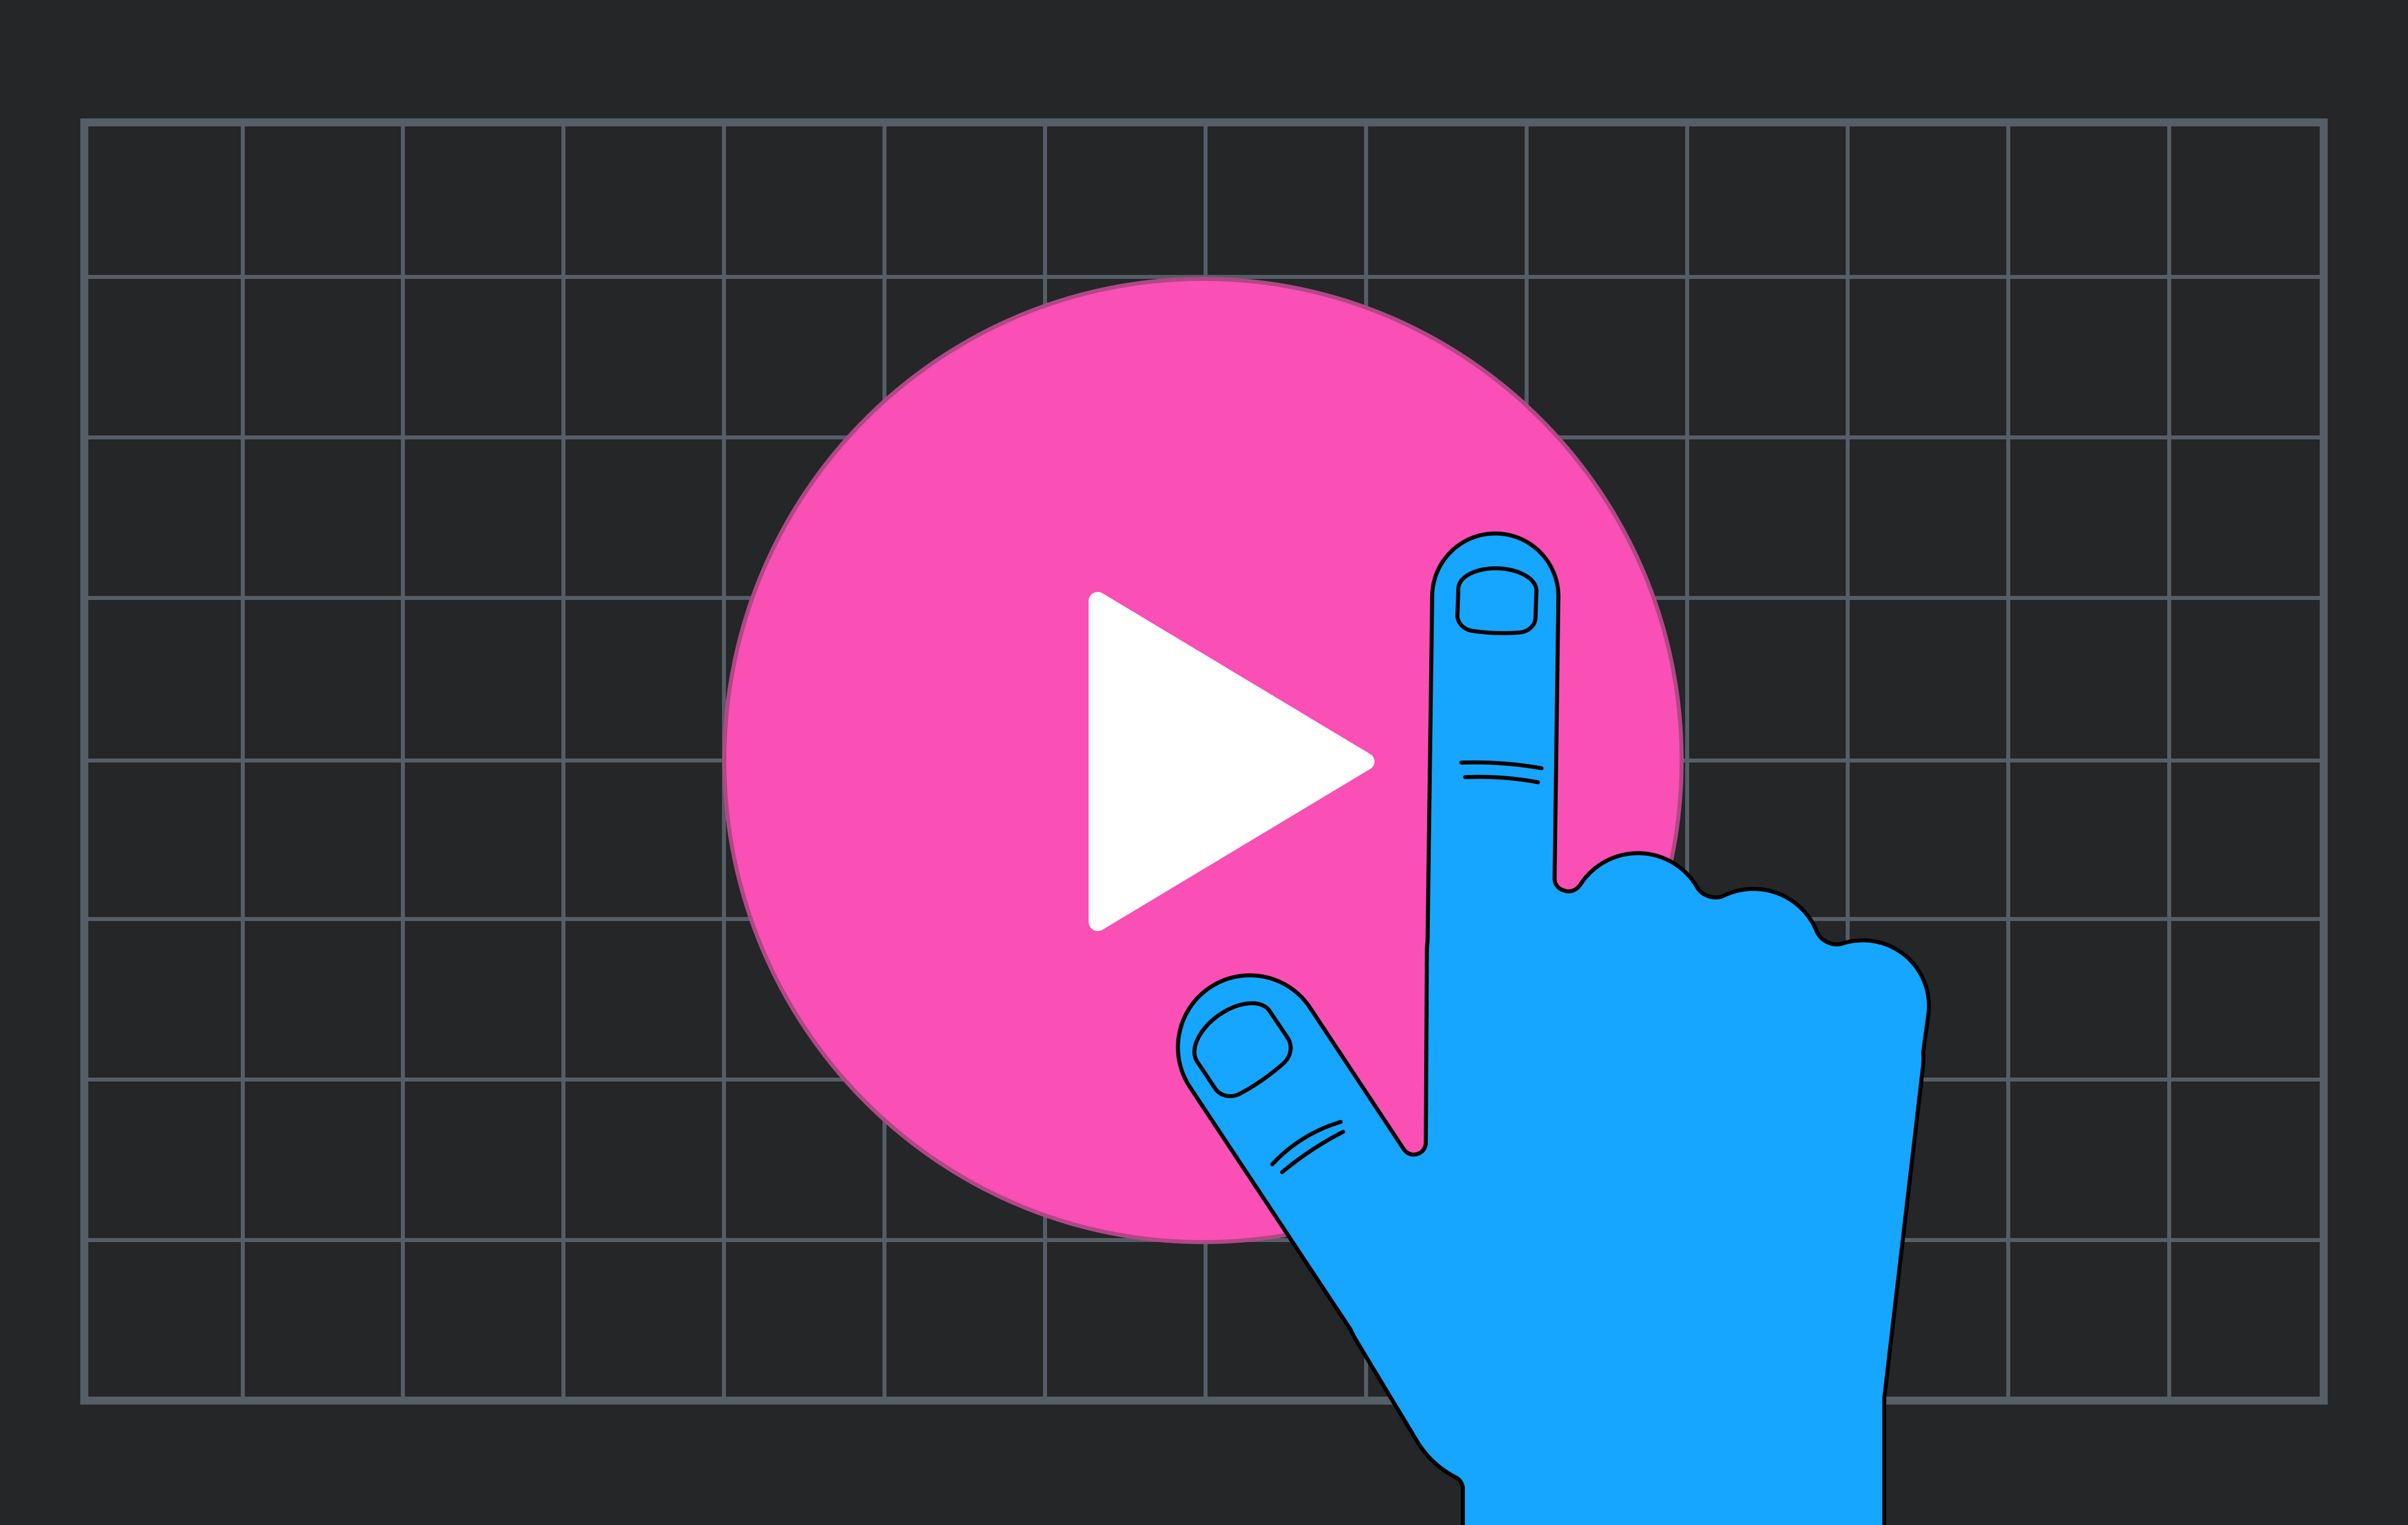 A digital image featuring a large pink play button symbol in the center with a blue hand pointing at it, all against a dark background with a grid pattern.